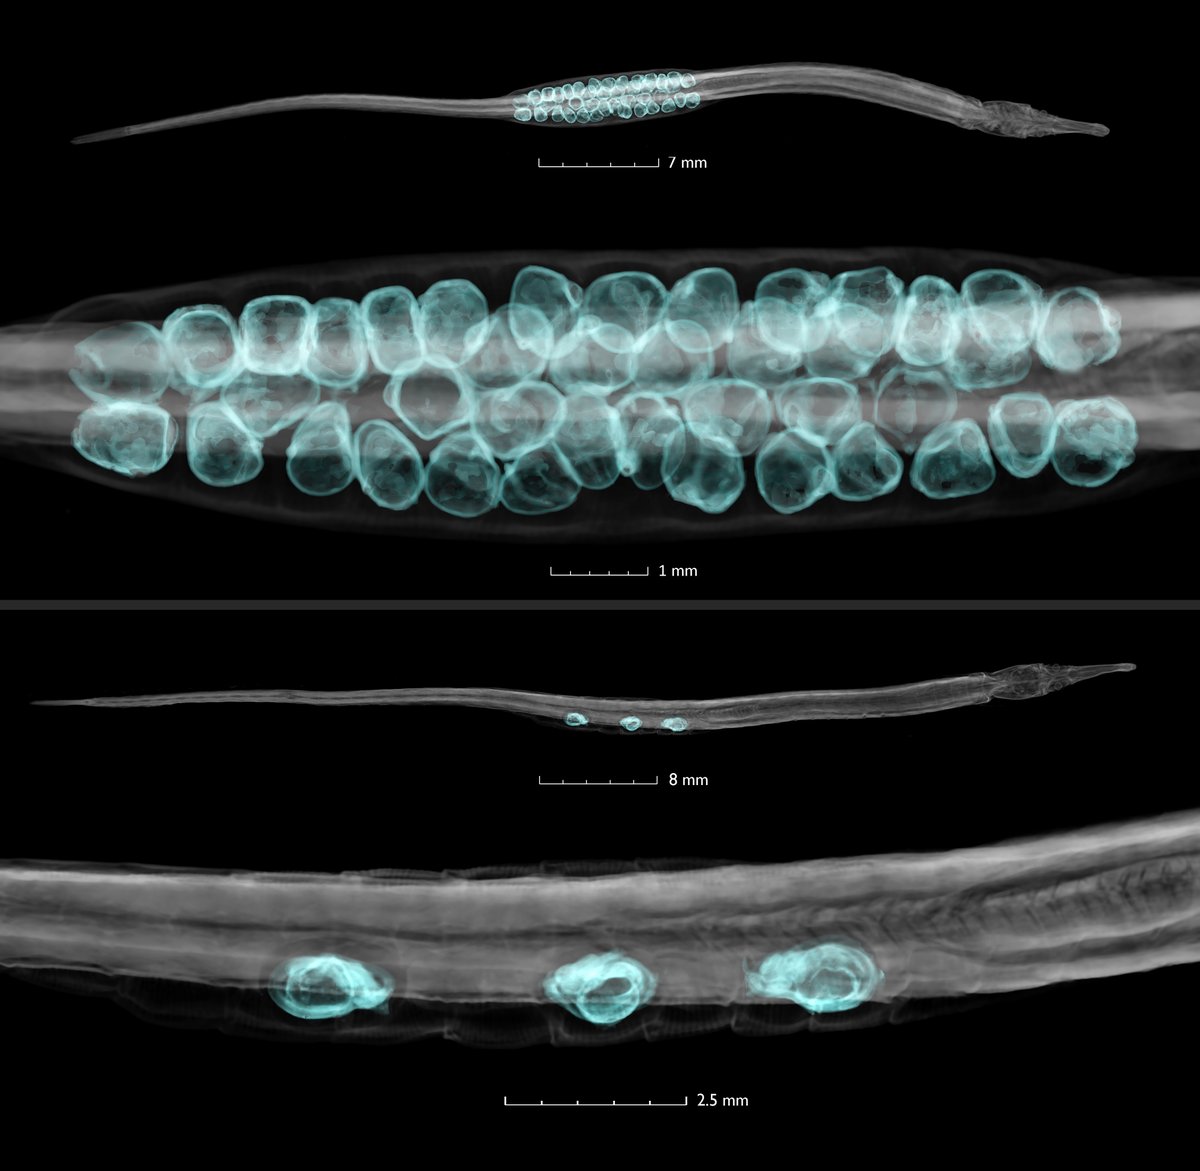 Look how pollution and habitat change is effecting egg clutch size of Gulf pipefish. Developing embryos in blue. Top: normal population, bottom: affected population. New Paper: Population decline of Gulf pipefish (Syngnathus scovelli) @SharkScience